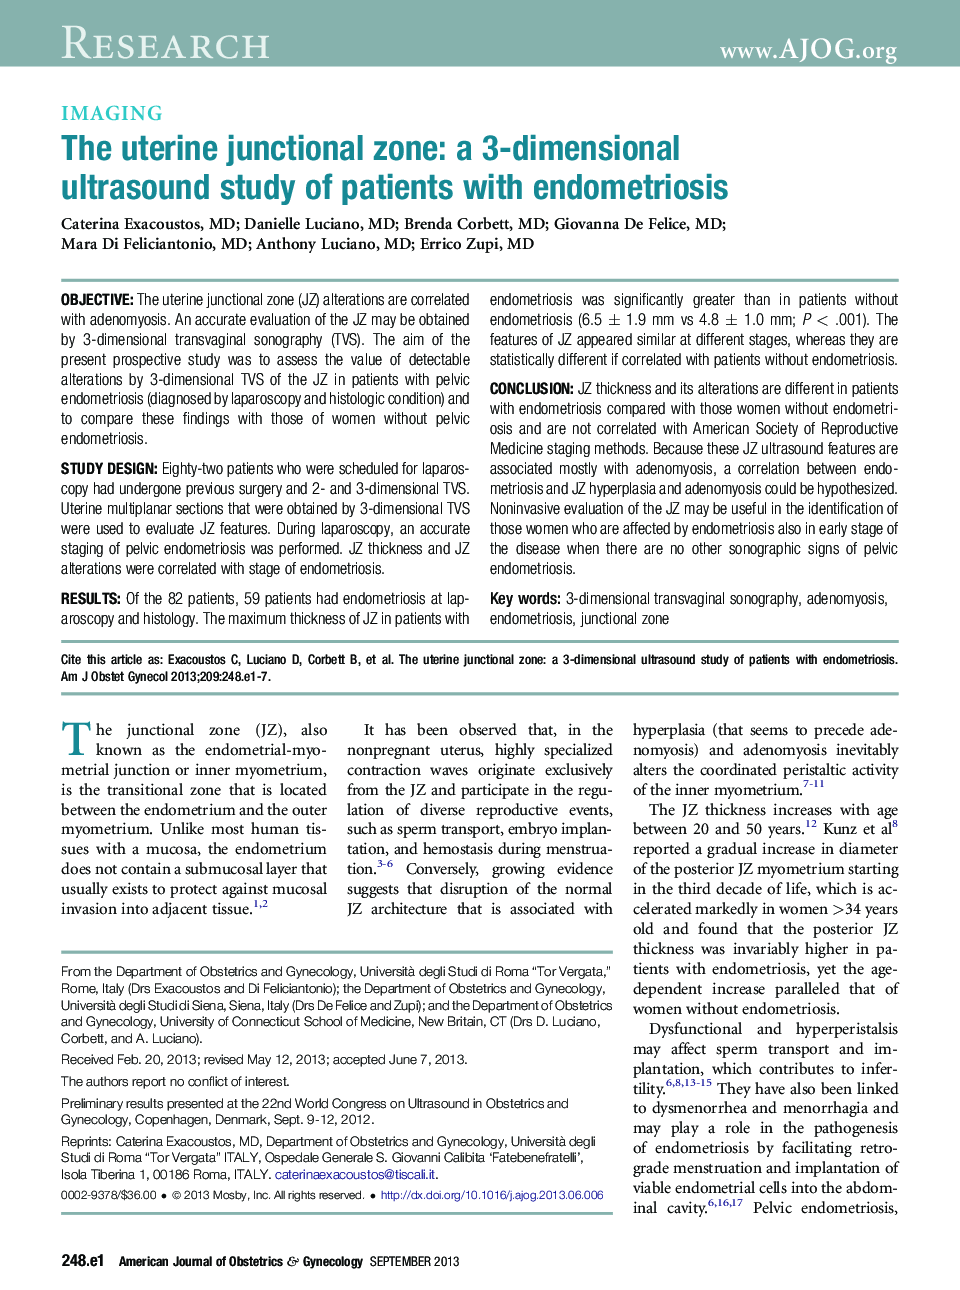 The uterine junctional zone: a 3-dimensional ultrasound study of patients with endometriosis